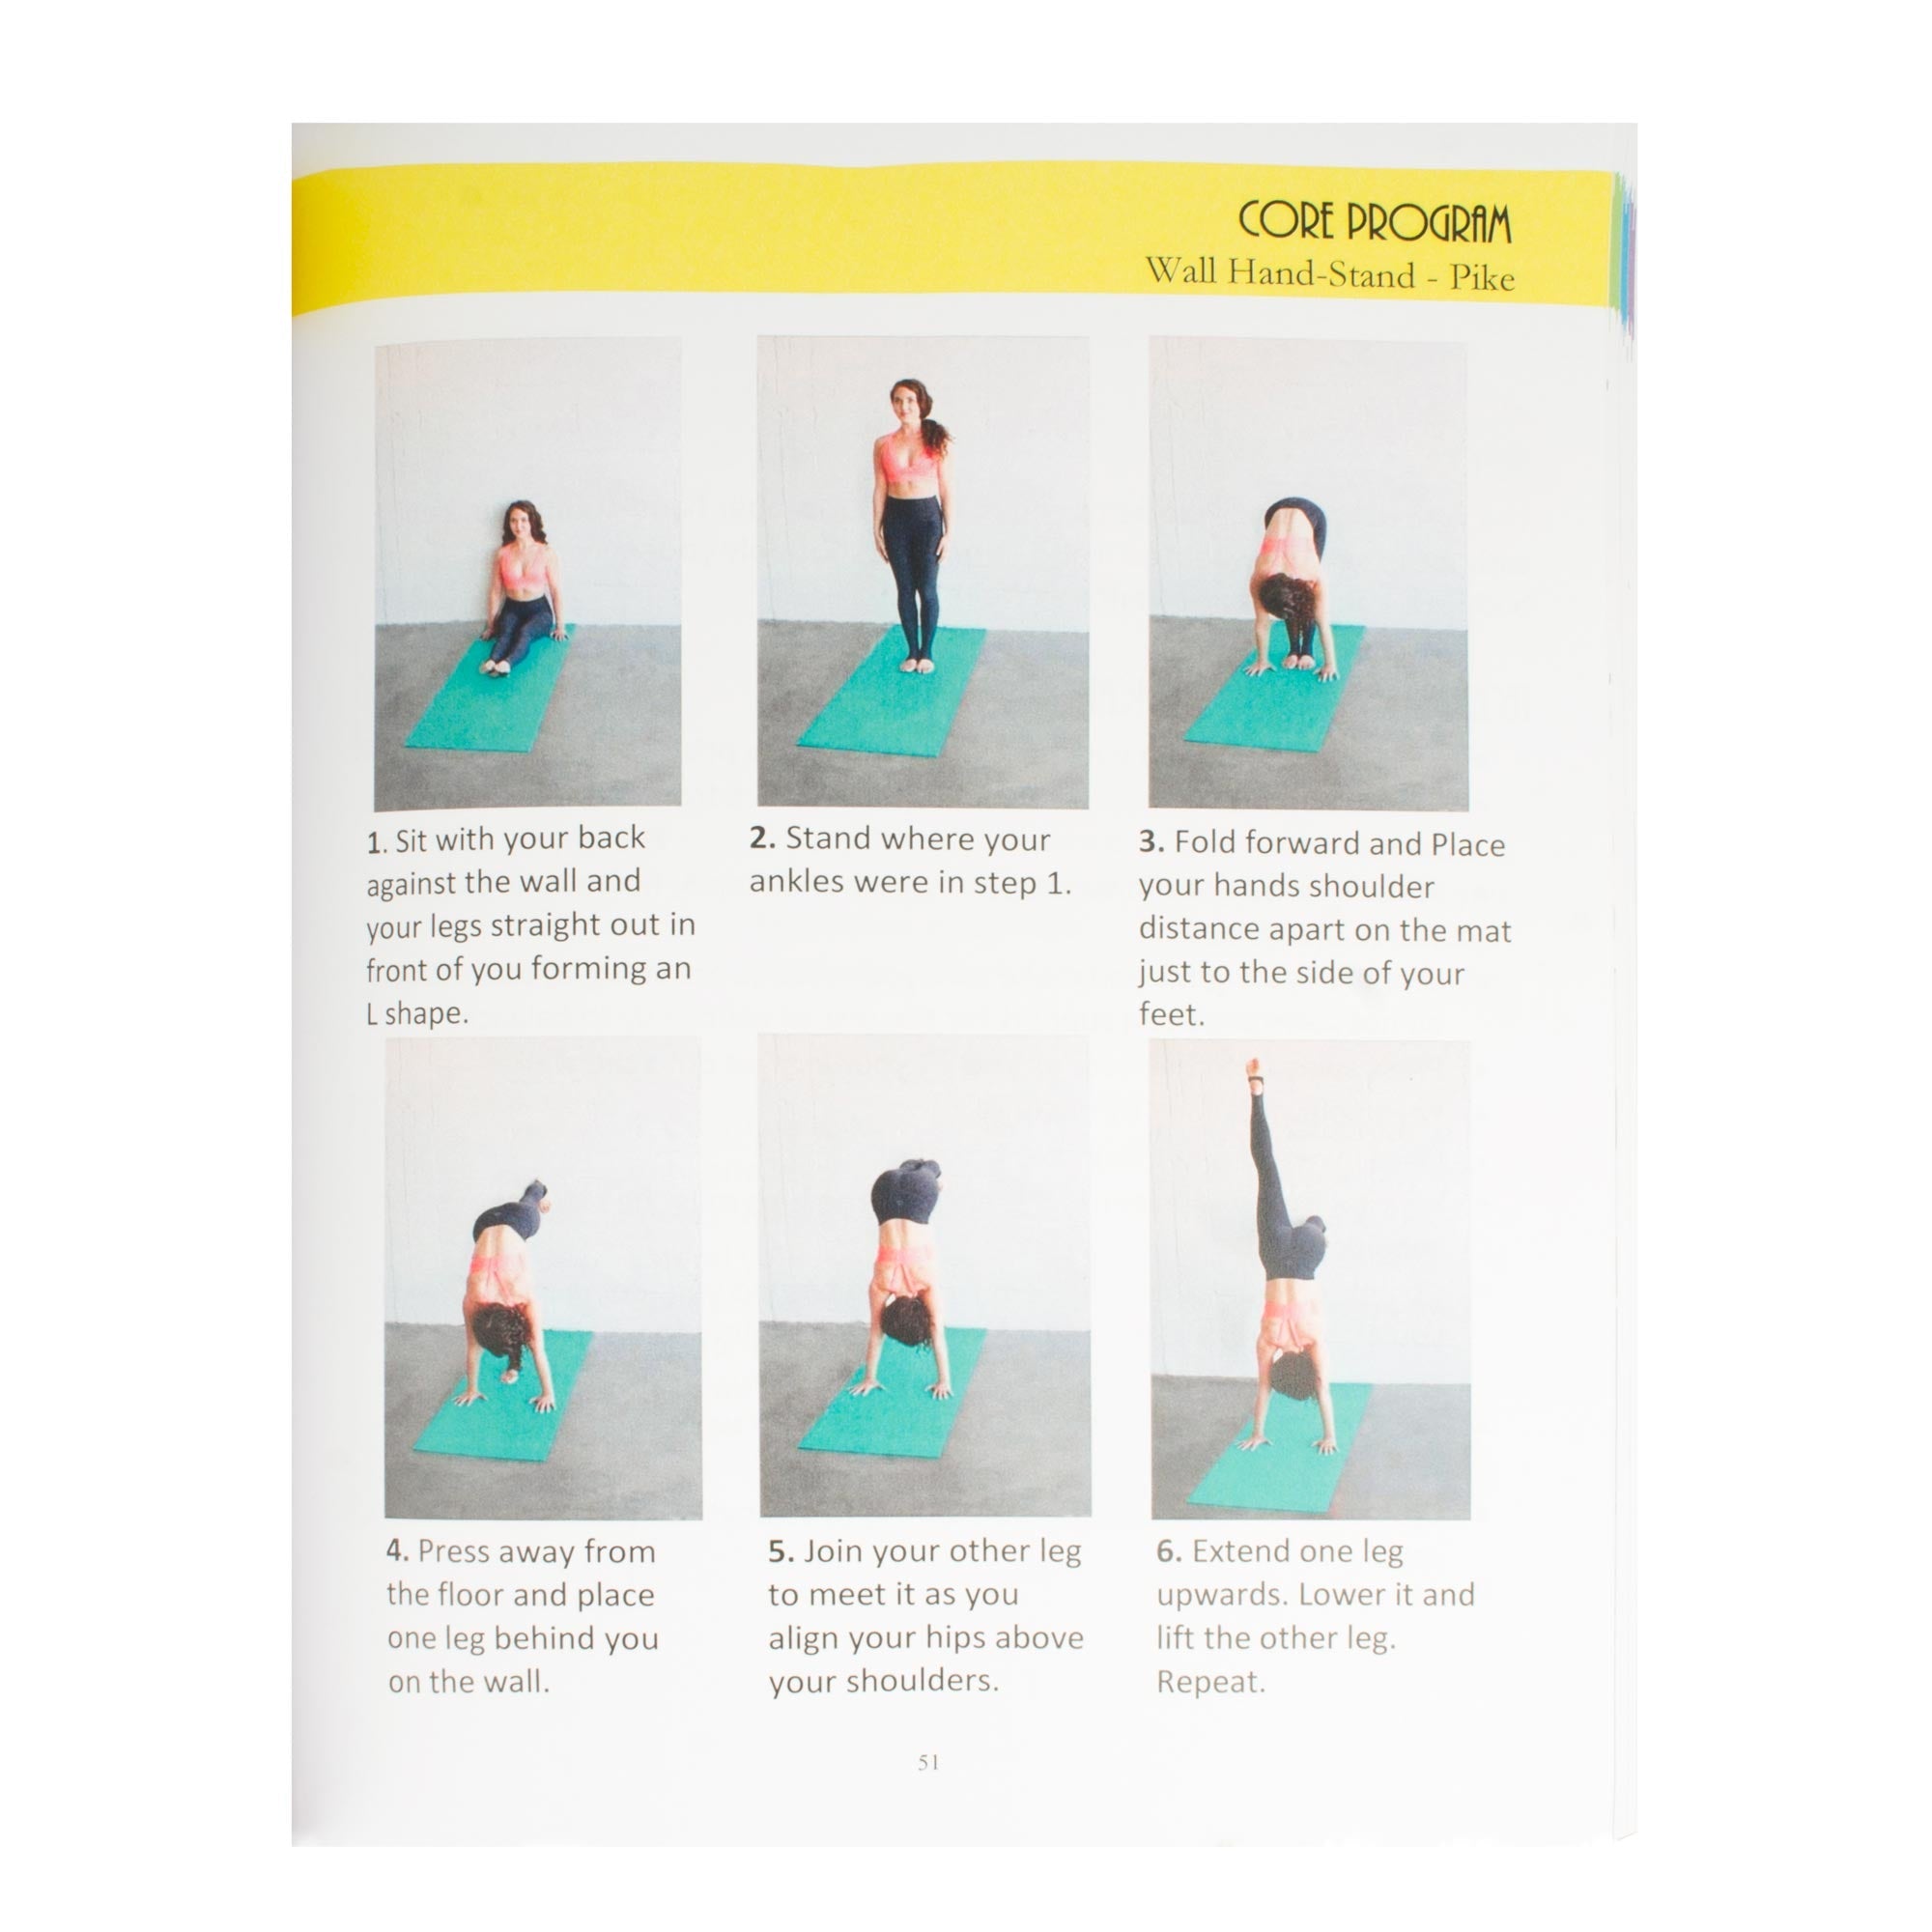 Aerial Physique FIT example page showing Wall handstand pike with photos and text